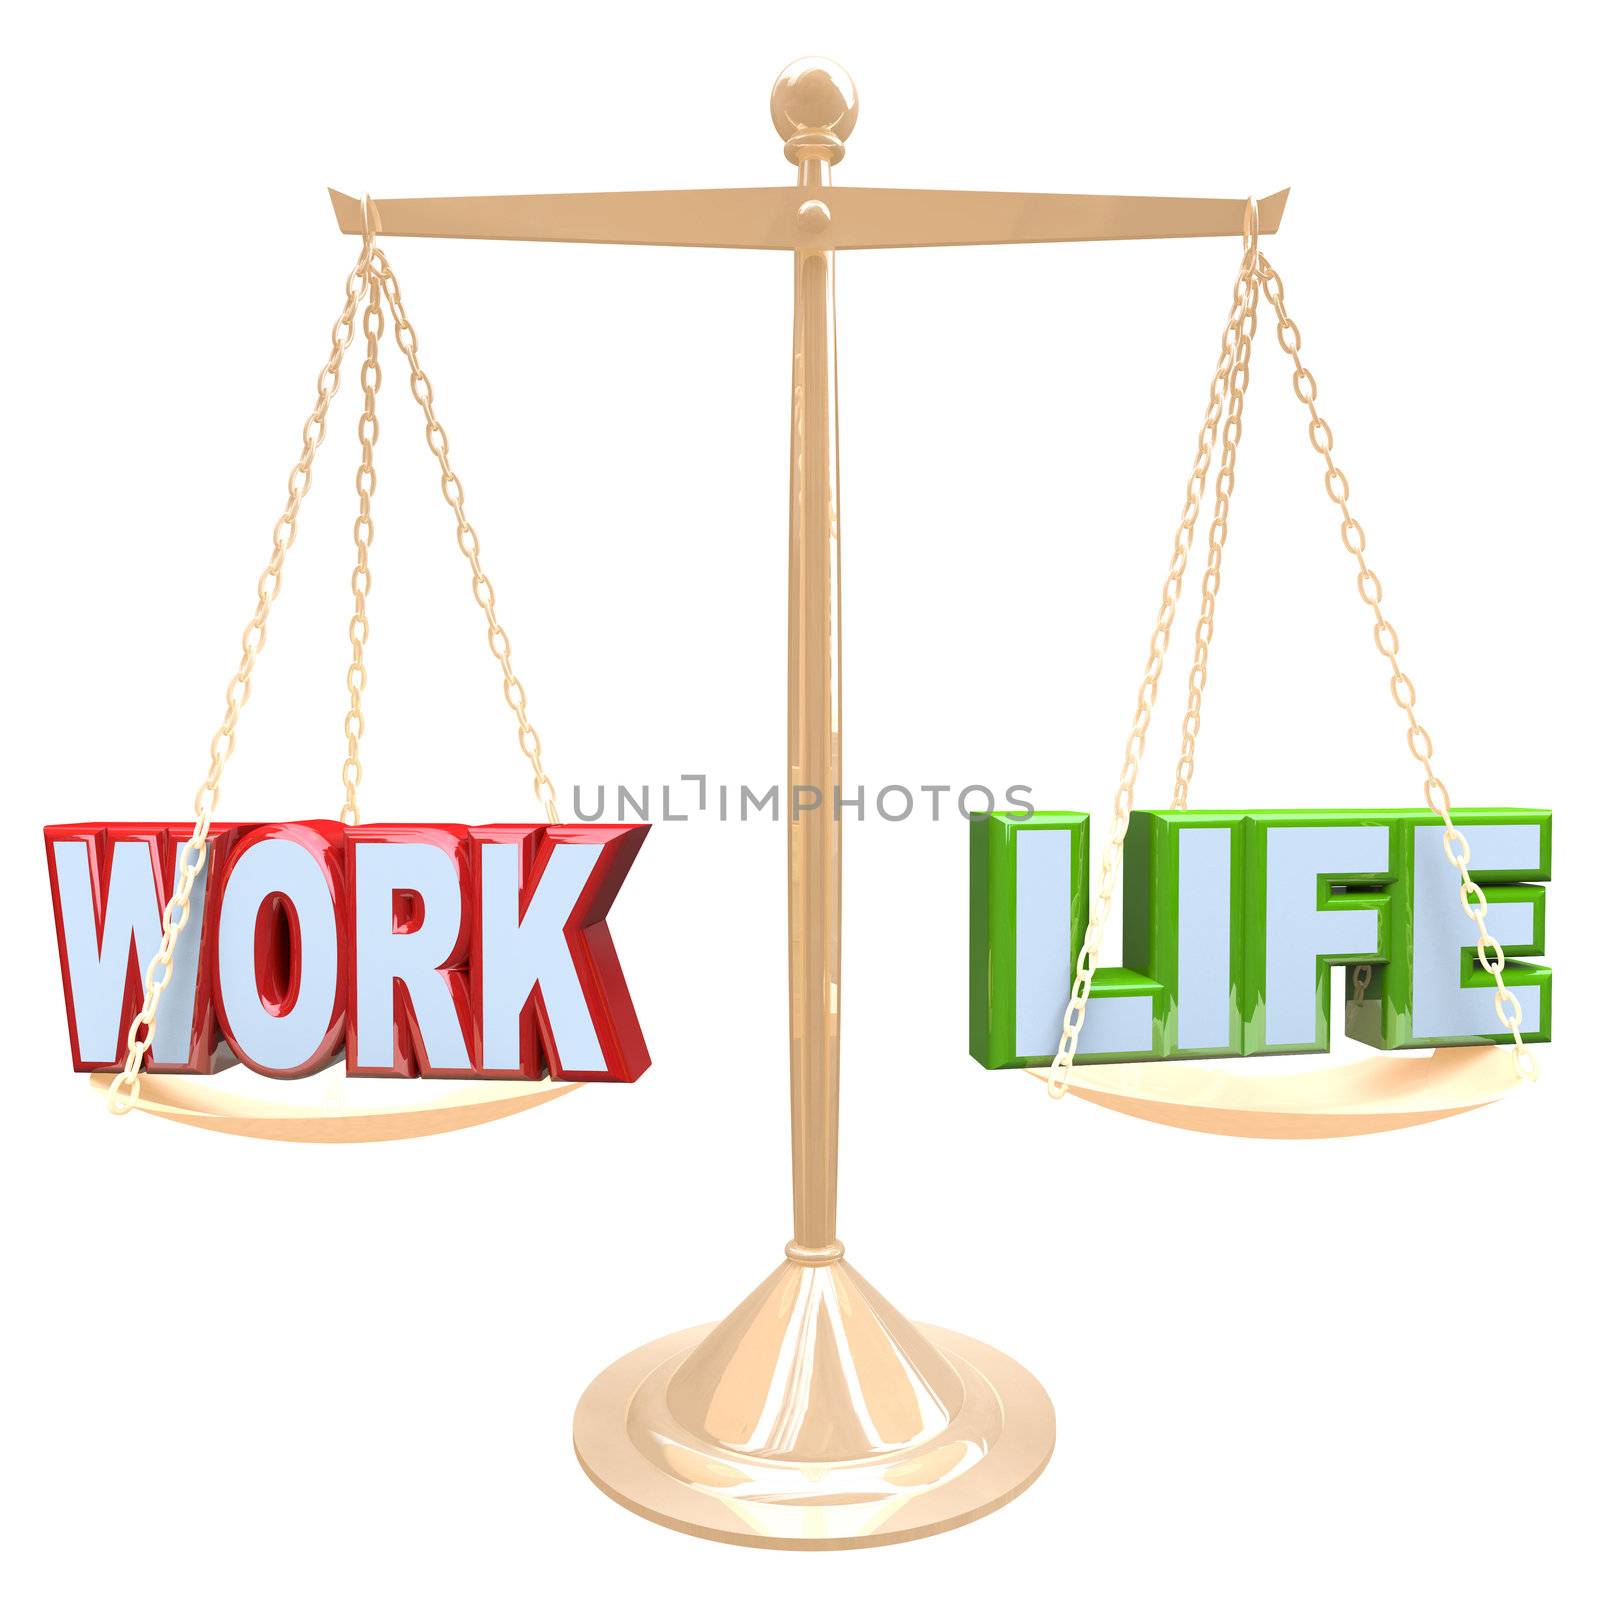 Work Vs Life Words on Scale Balancing Life Stress by iQoncept